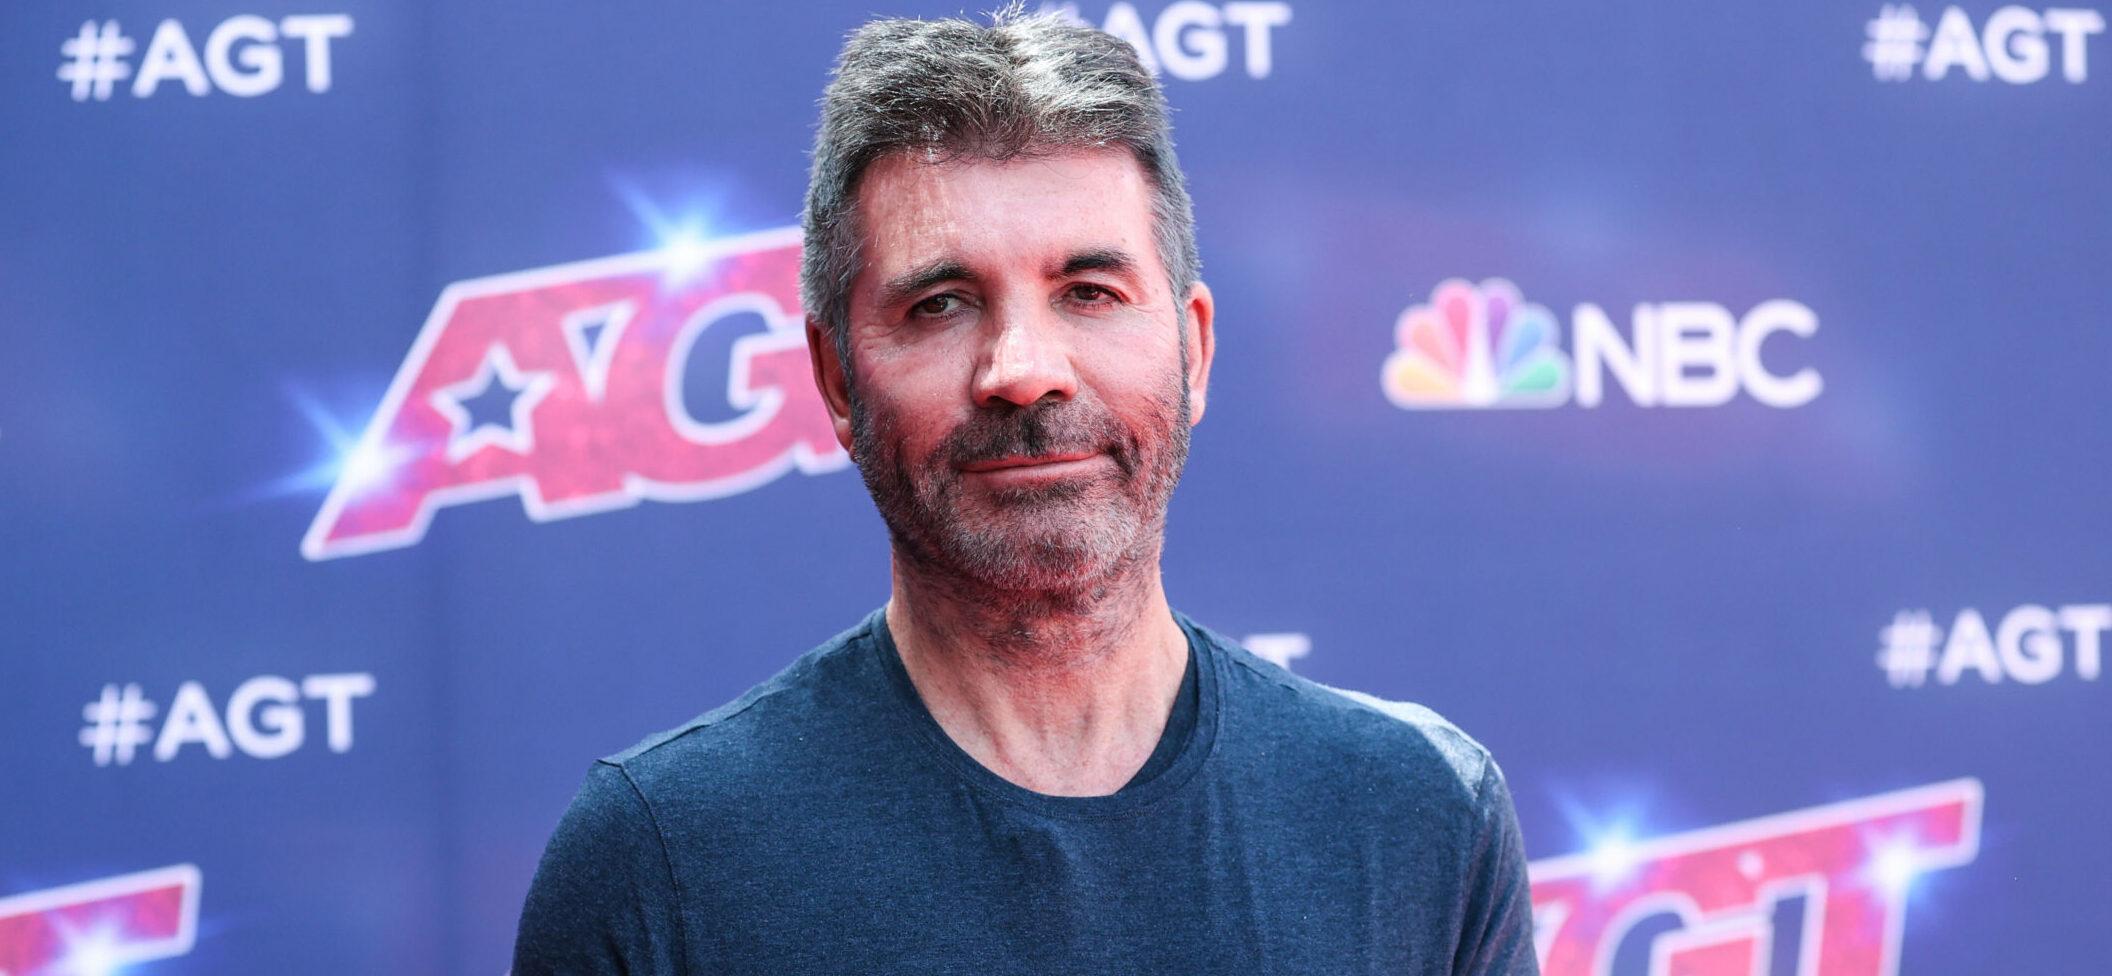 Simon Cowell’s Face In New Video Has Fans SHOCKED!: ‘What On Earth Happened To Your Face?’